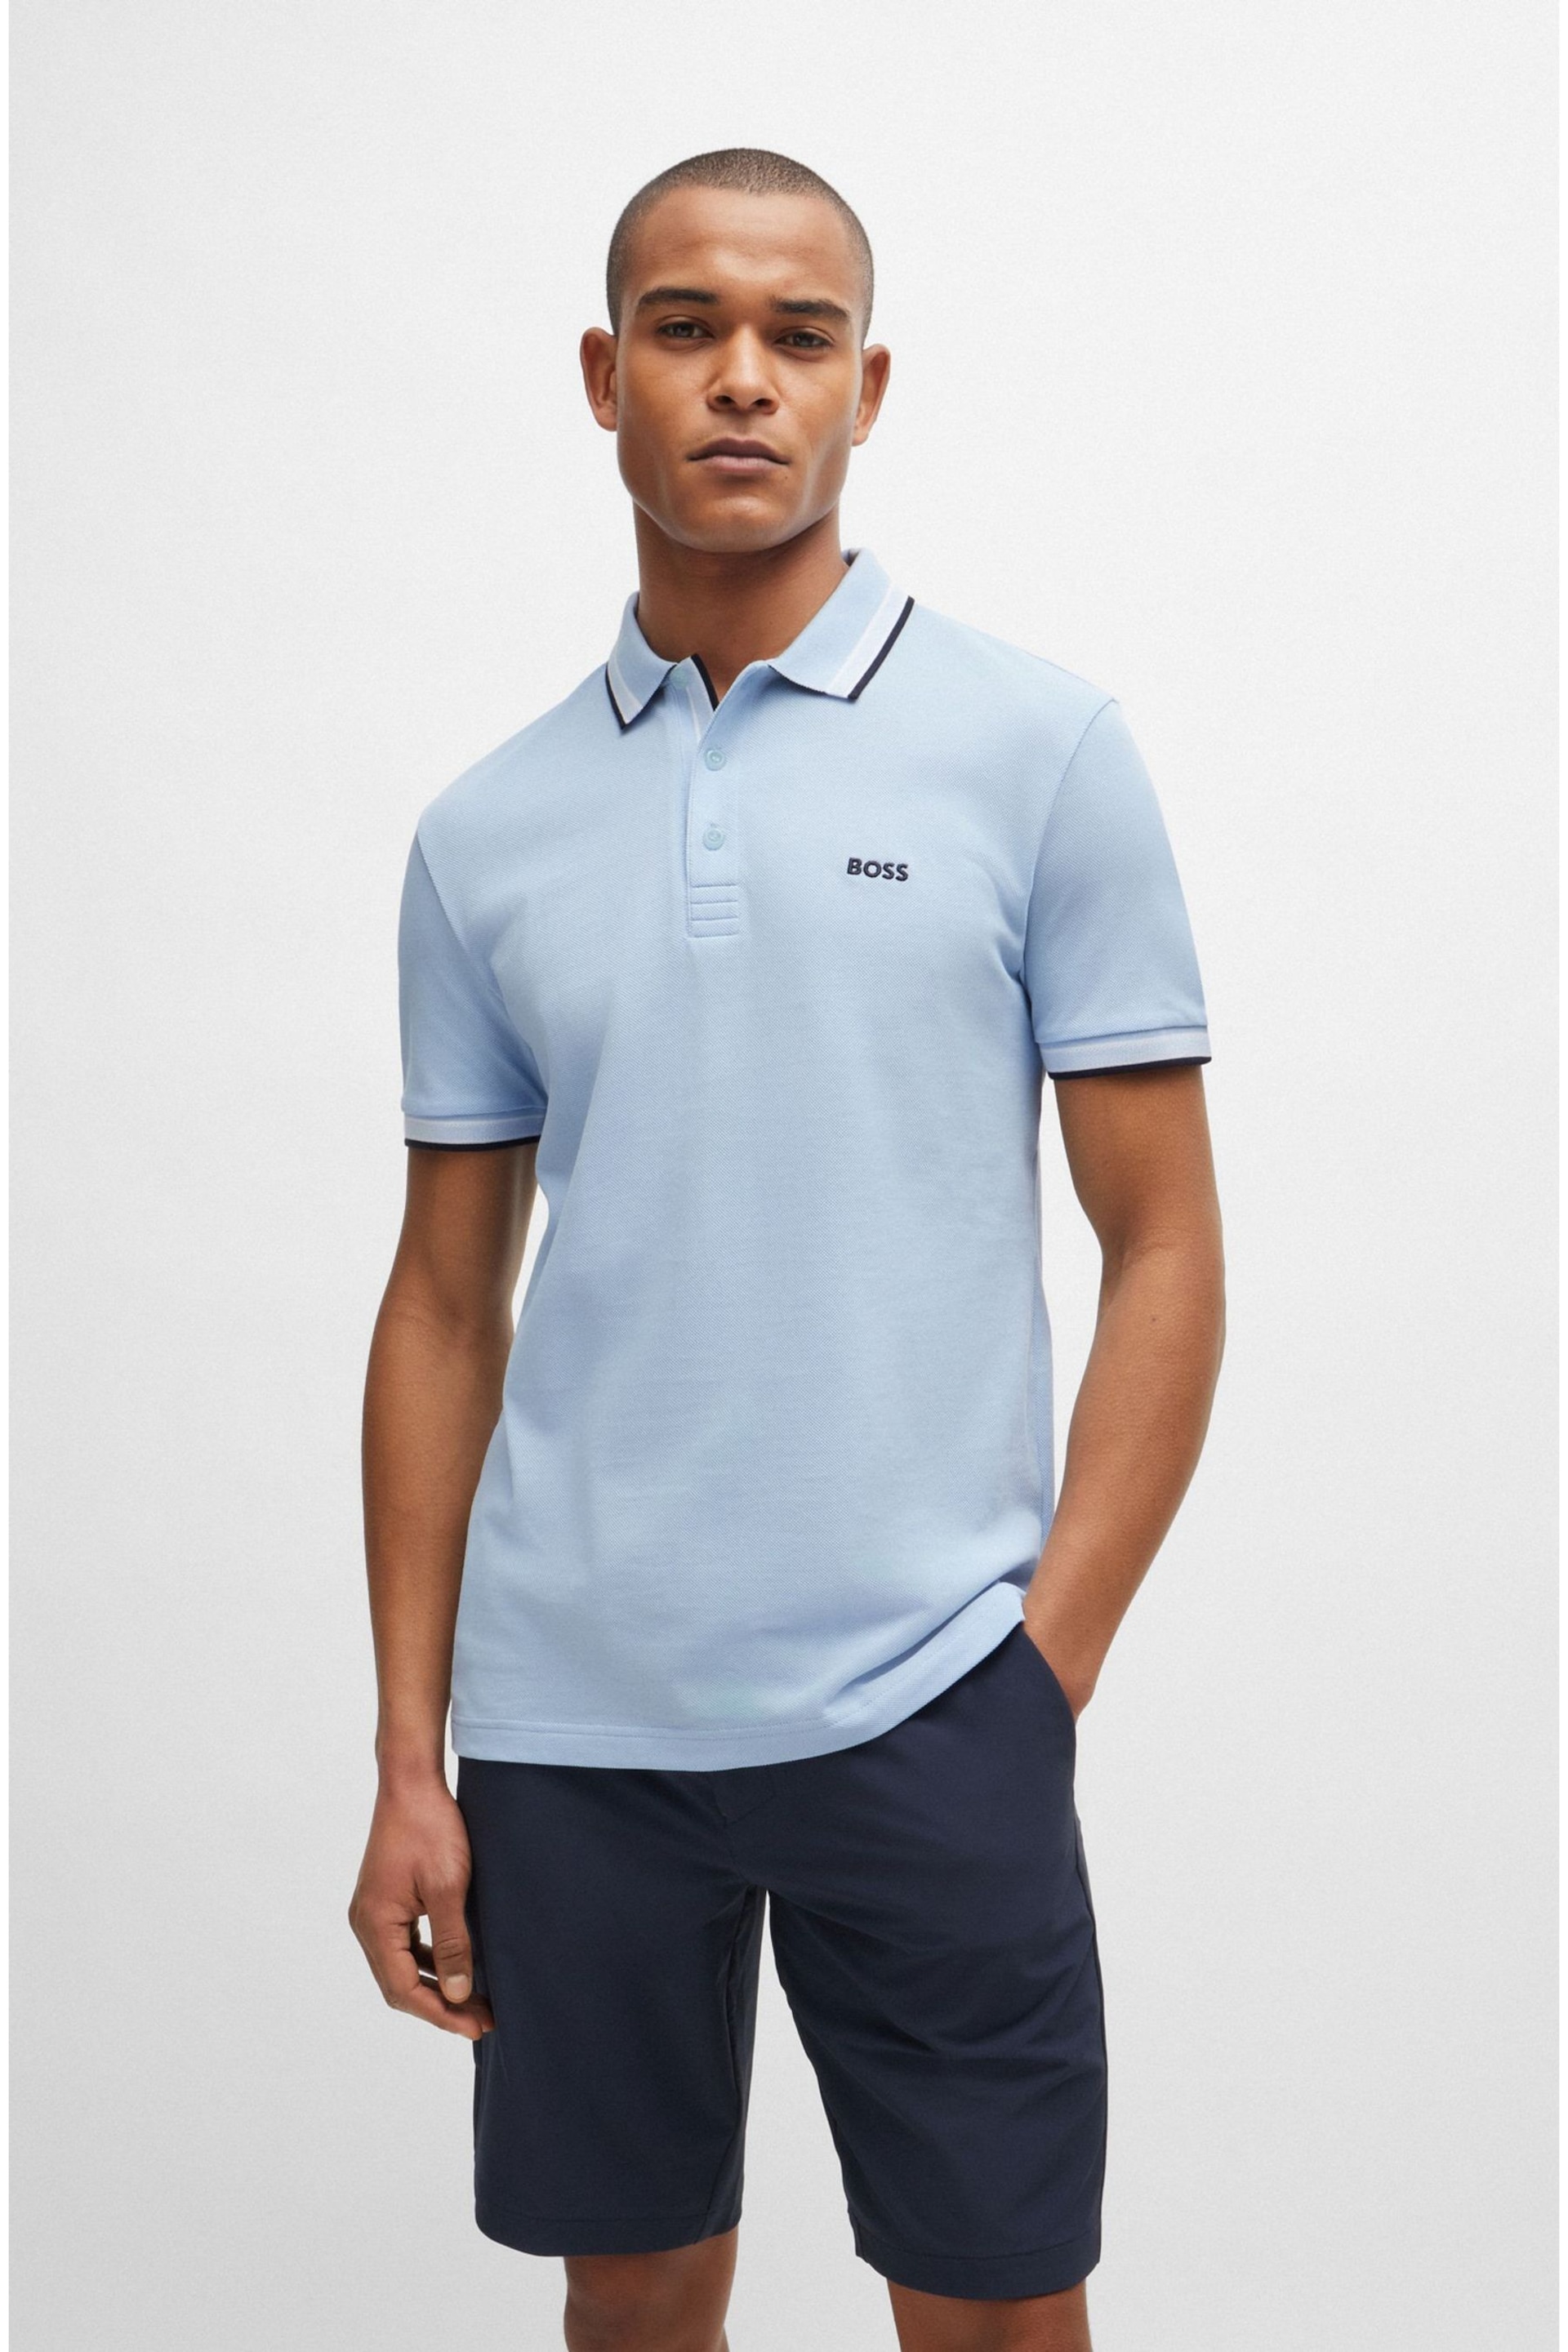 BOSS Light Blue/Black Tipping Paddy Polo Pink Cream Shirt - Image 1 of 8